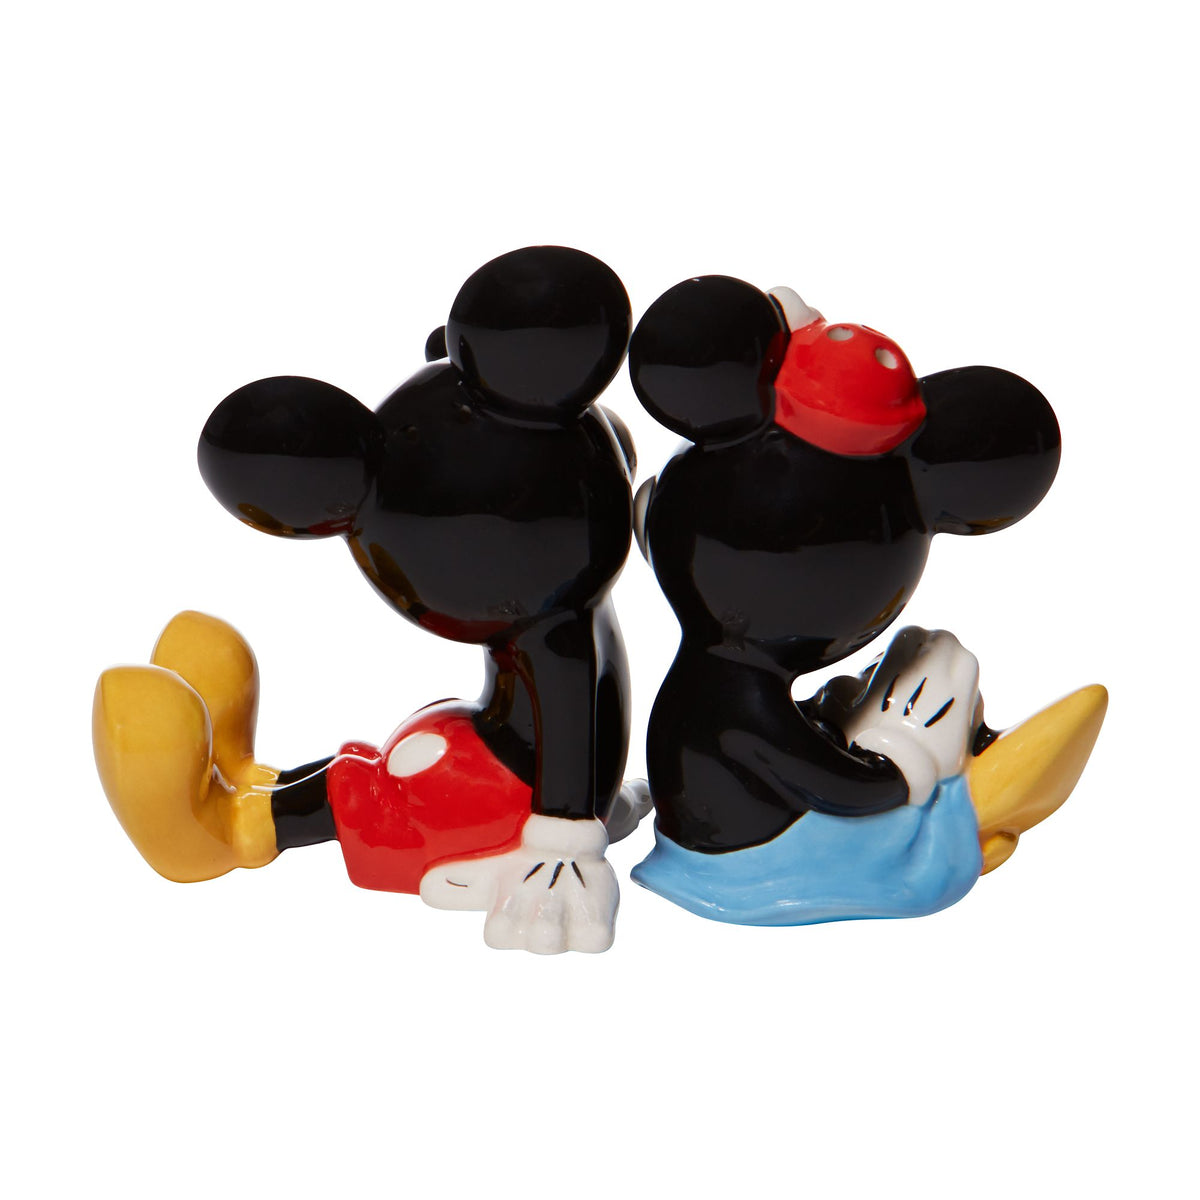 Disney Mickey Mouse, Minnie Mouse & Friends Ceramic Salt & Pepper Shakers  New